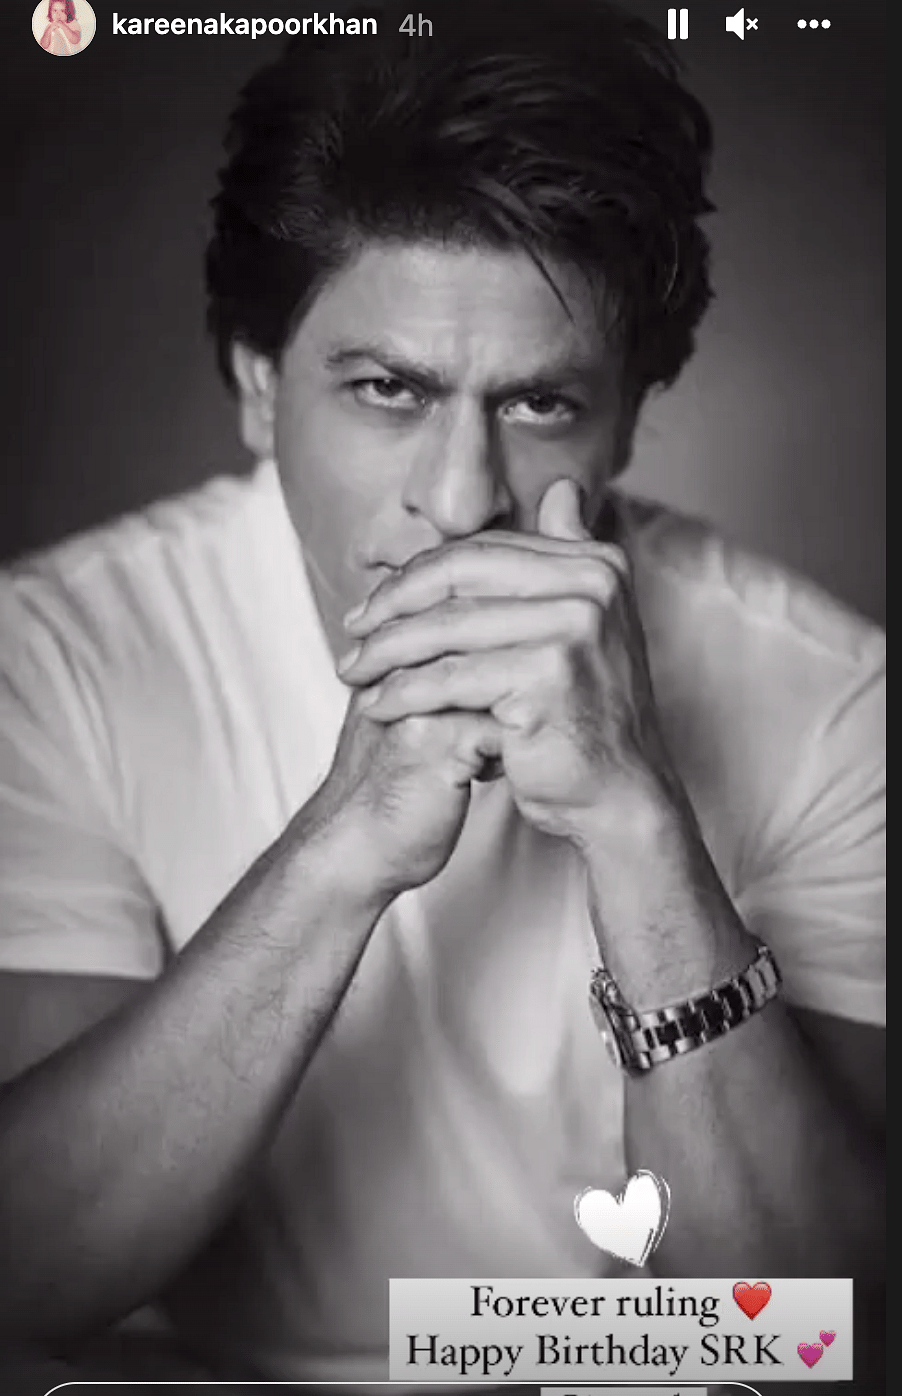 On Shah Rukh Khan's birthday, wishes are pouring in from the industry.